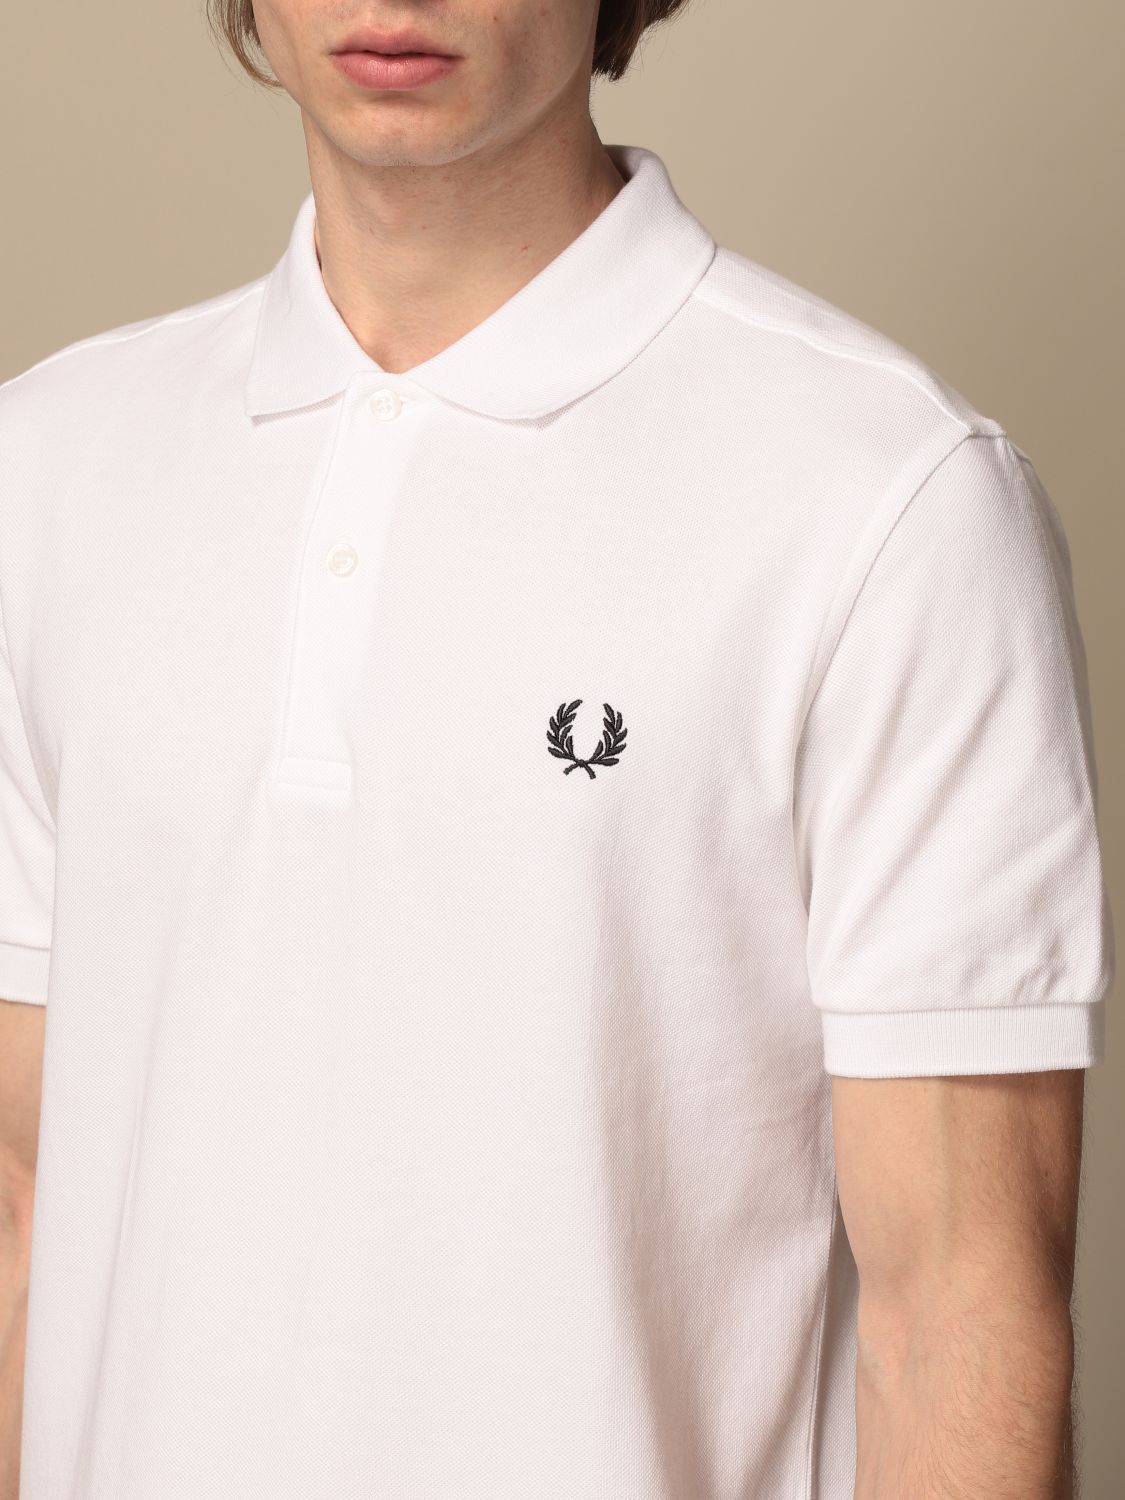 FRED PERRY: polo shirt for men - White | Fred Perry polo shirt m6000 ...